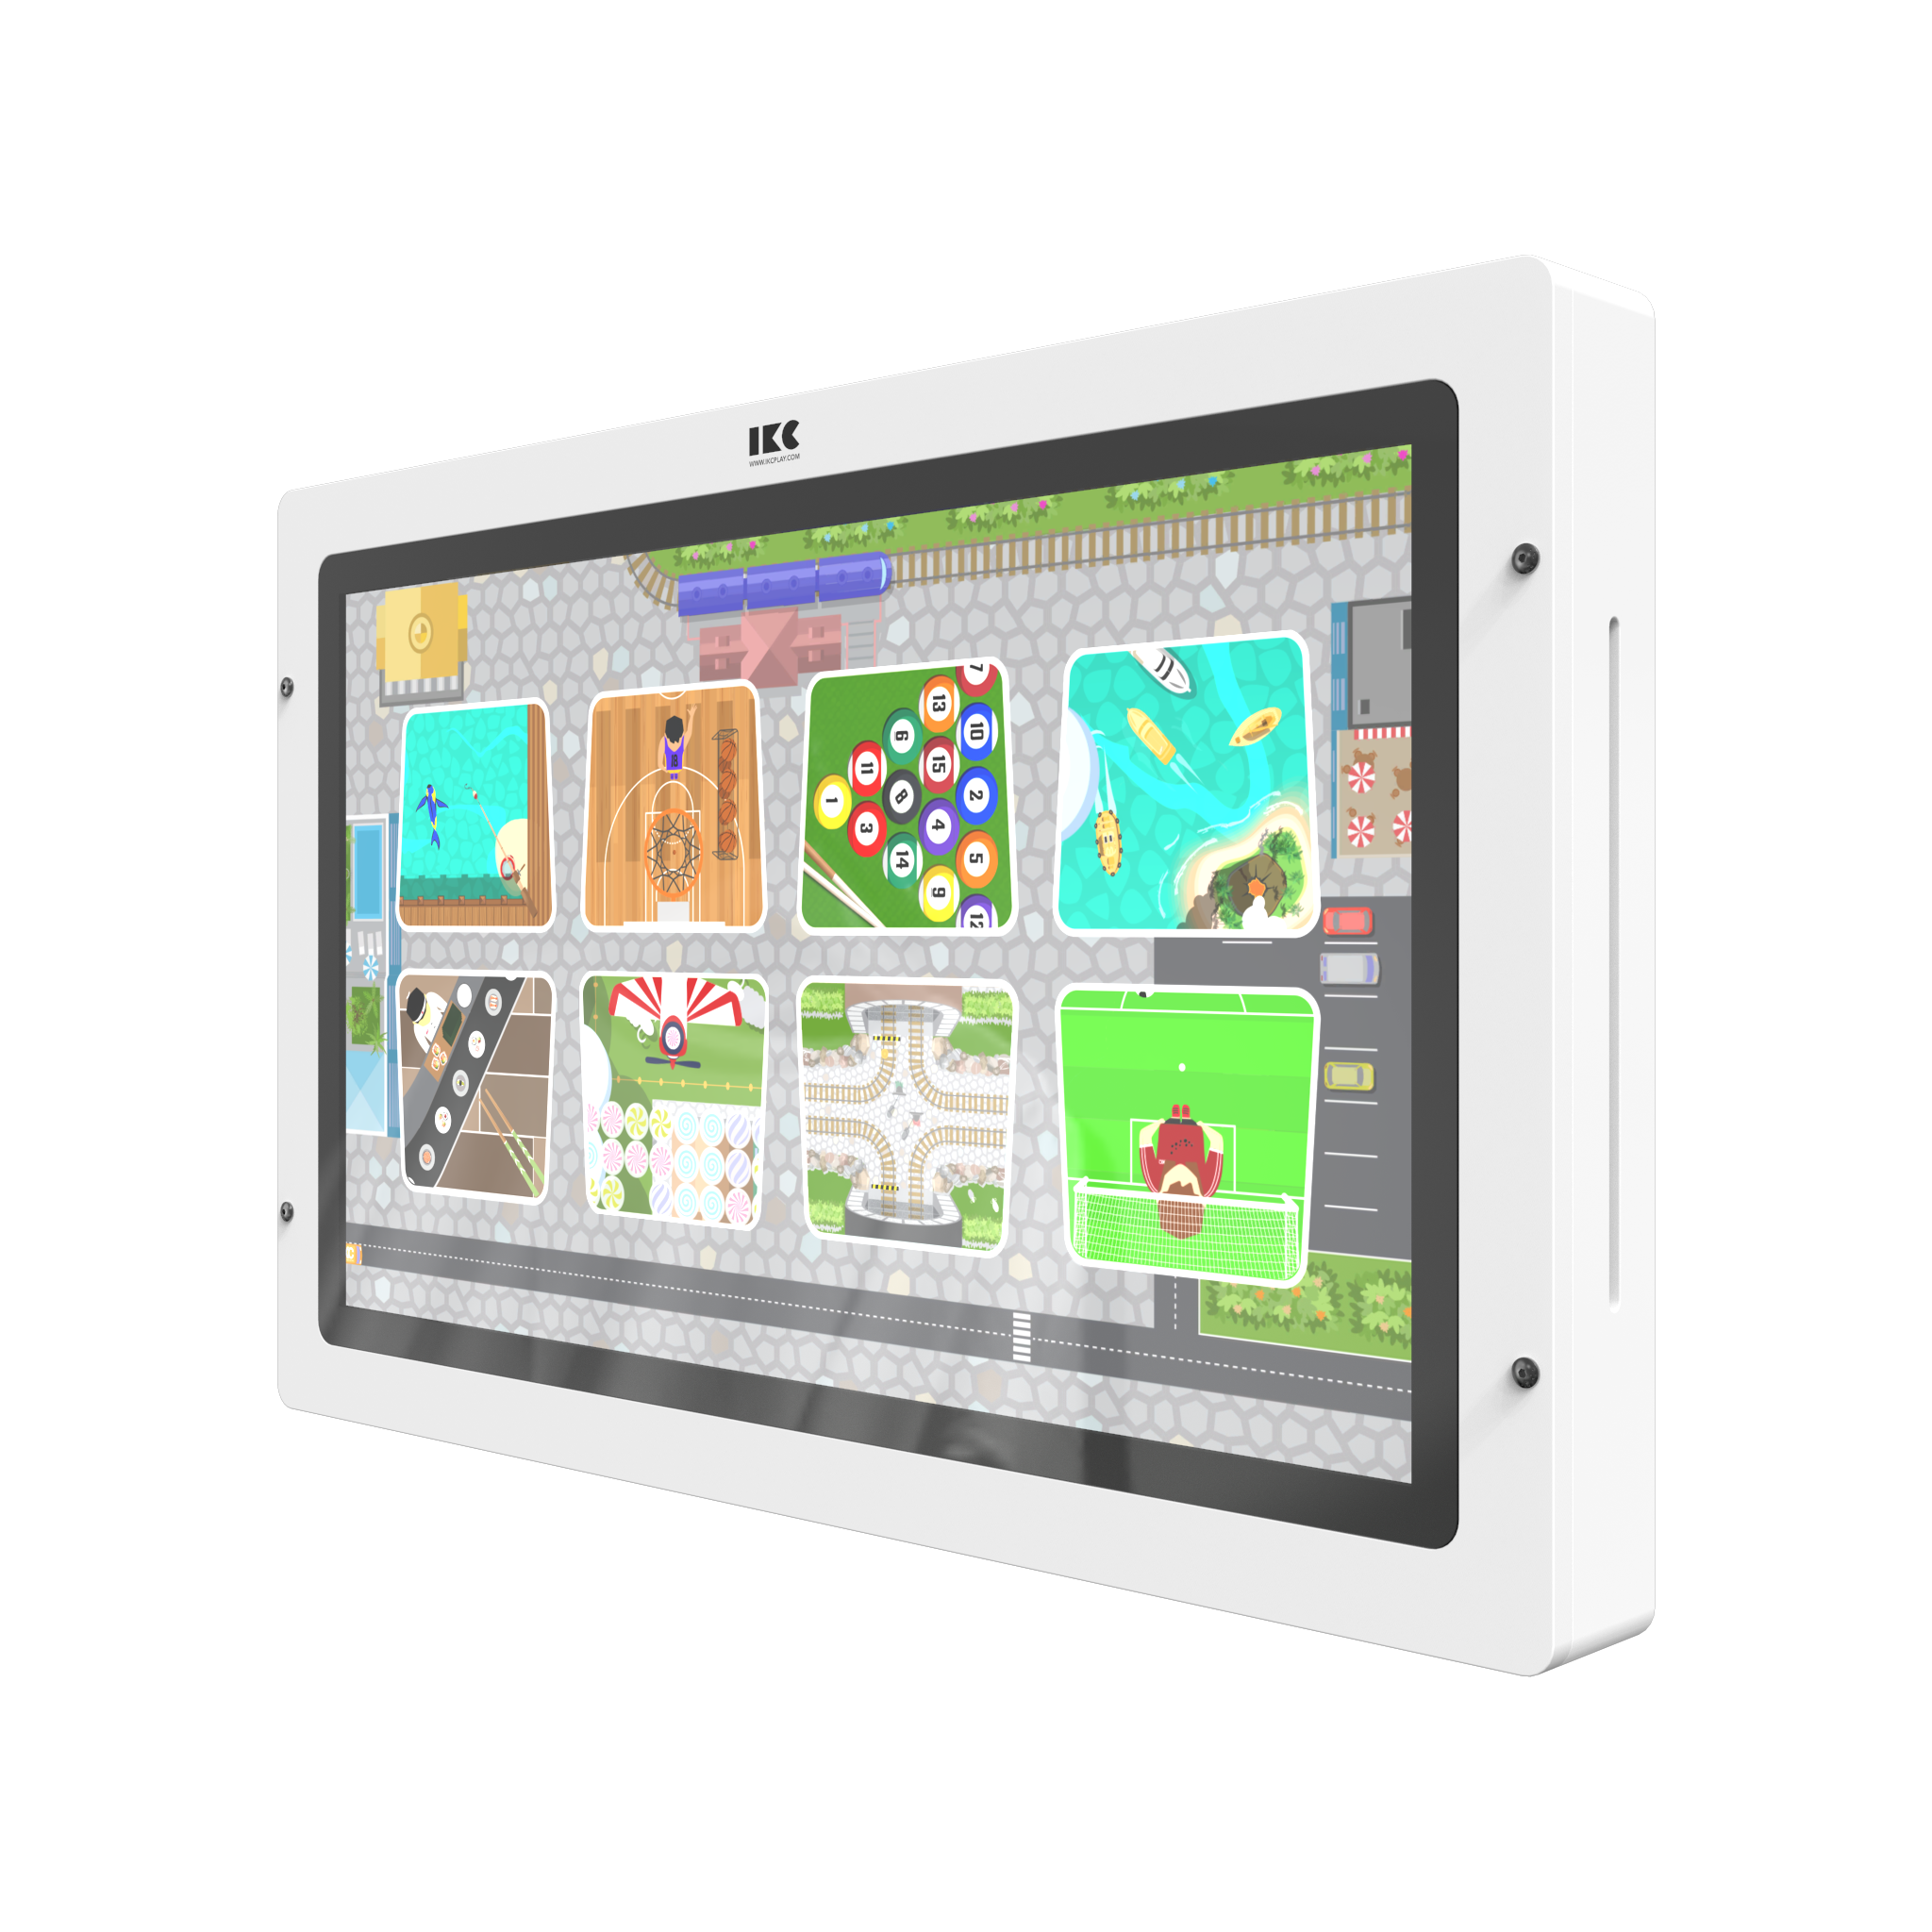 This image shows an interactive play system Delta 43 inch